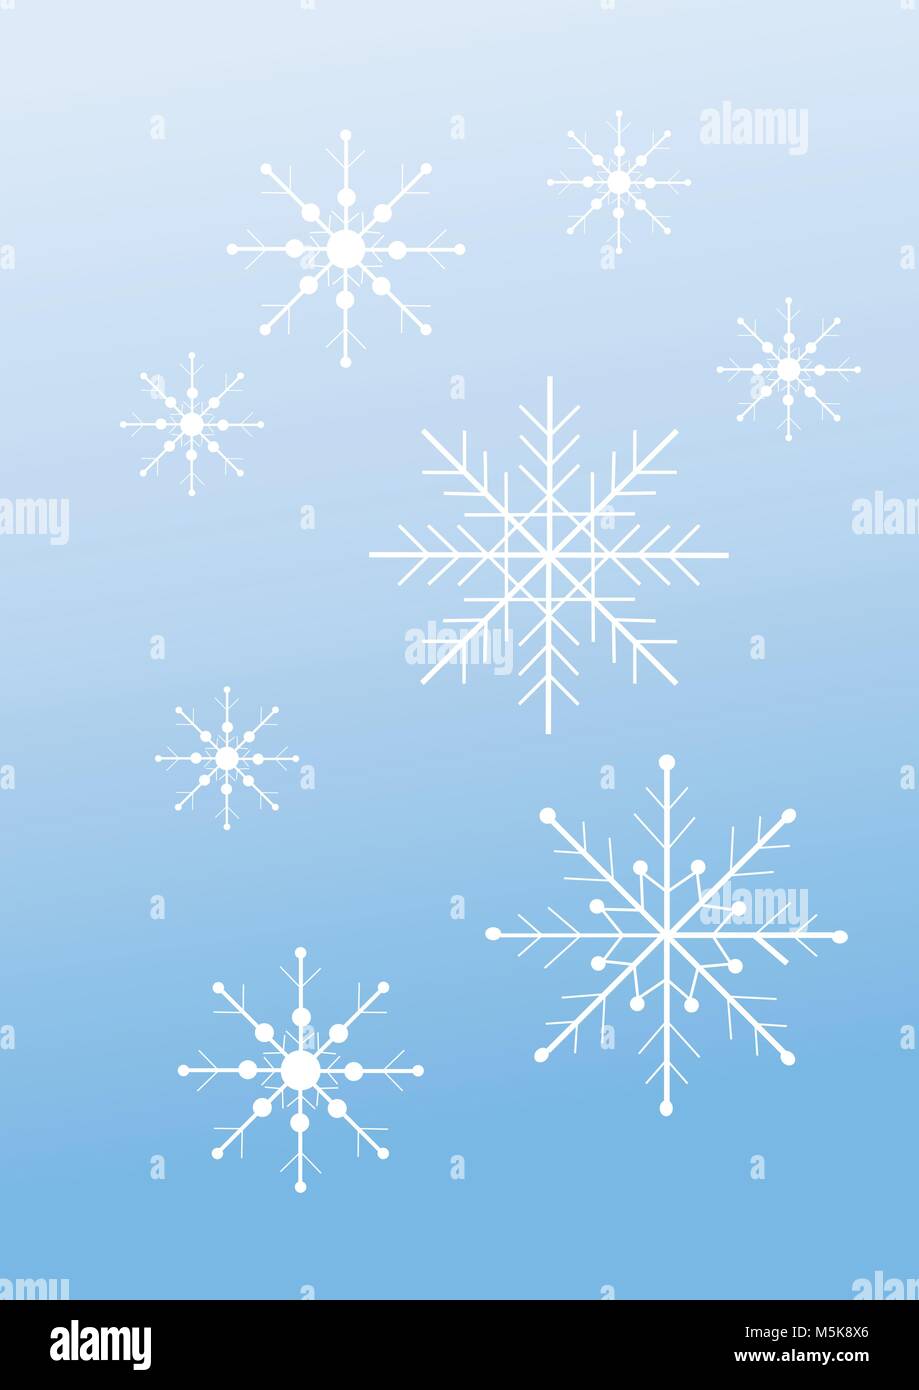 snowflakes on a pale blue background Stock Vector